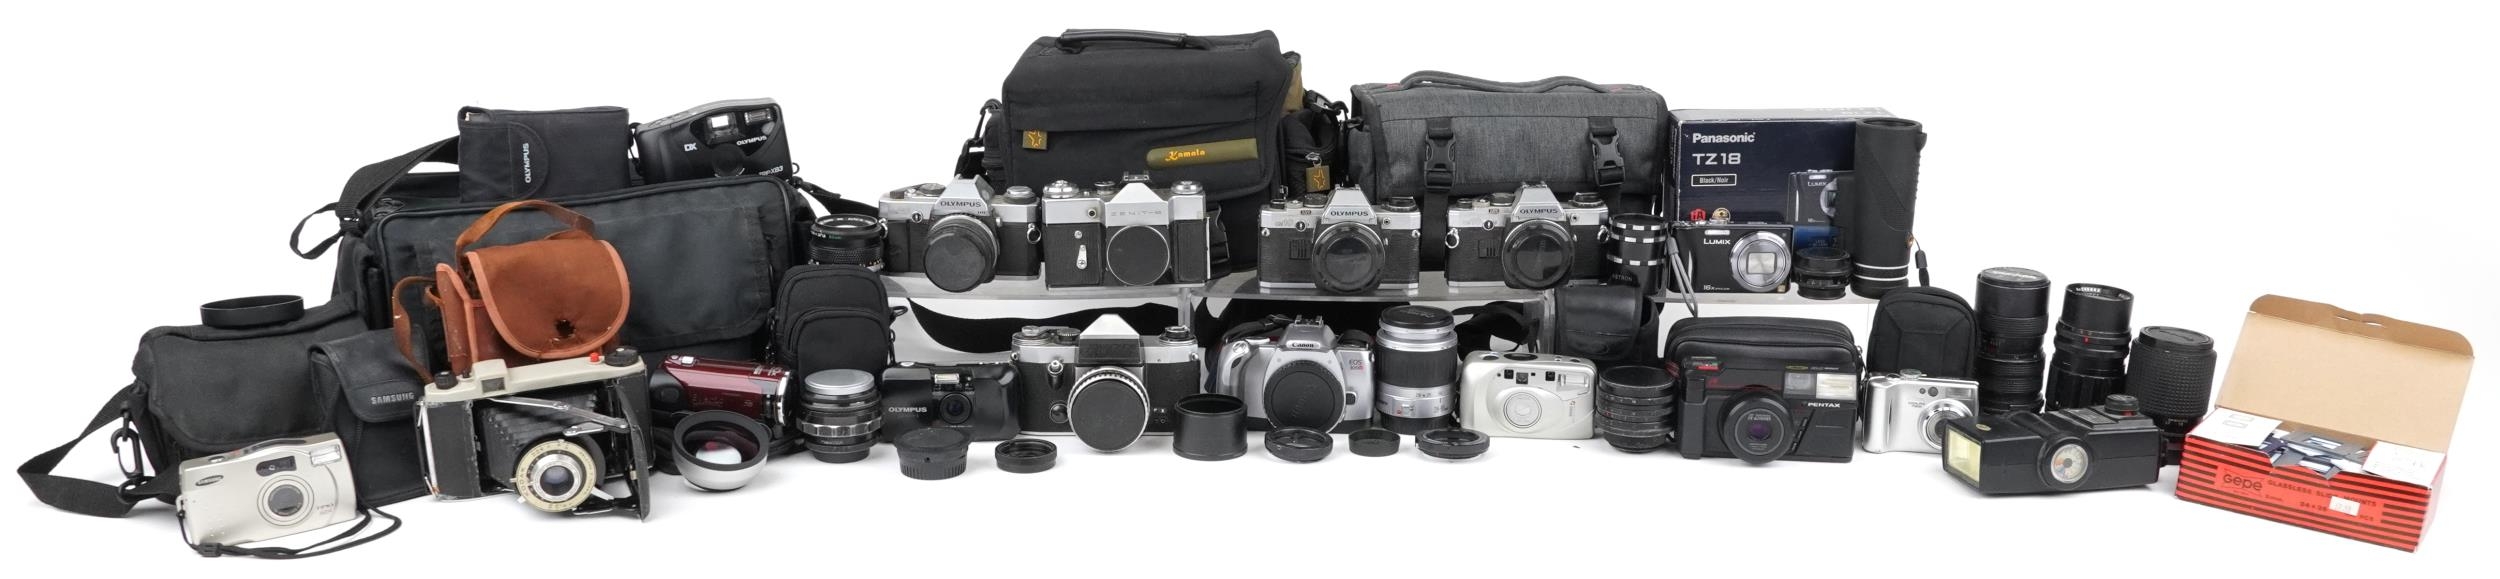 Vintage and later cameras, lenses and accessories including Zenit-B, Canon EOS300V, Olympus,